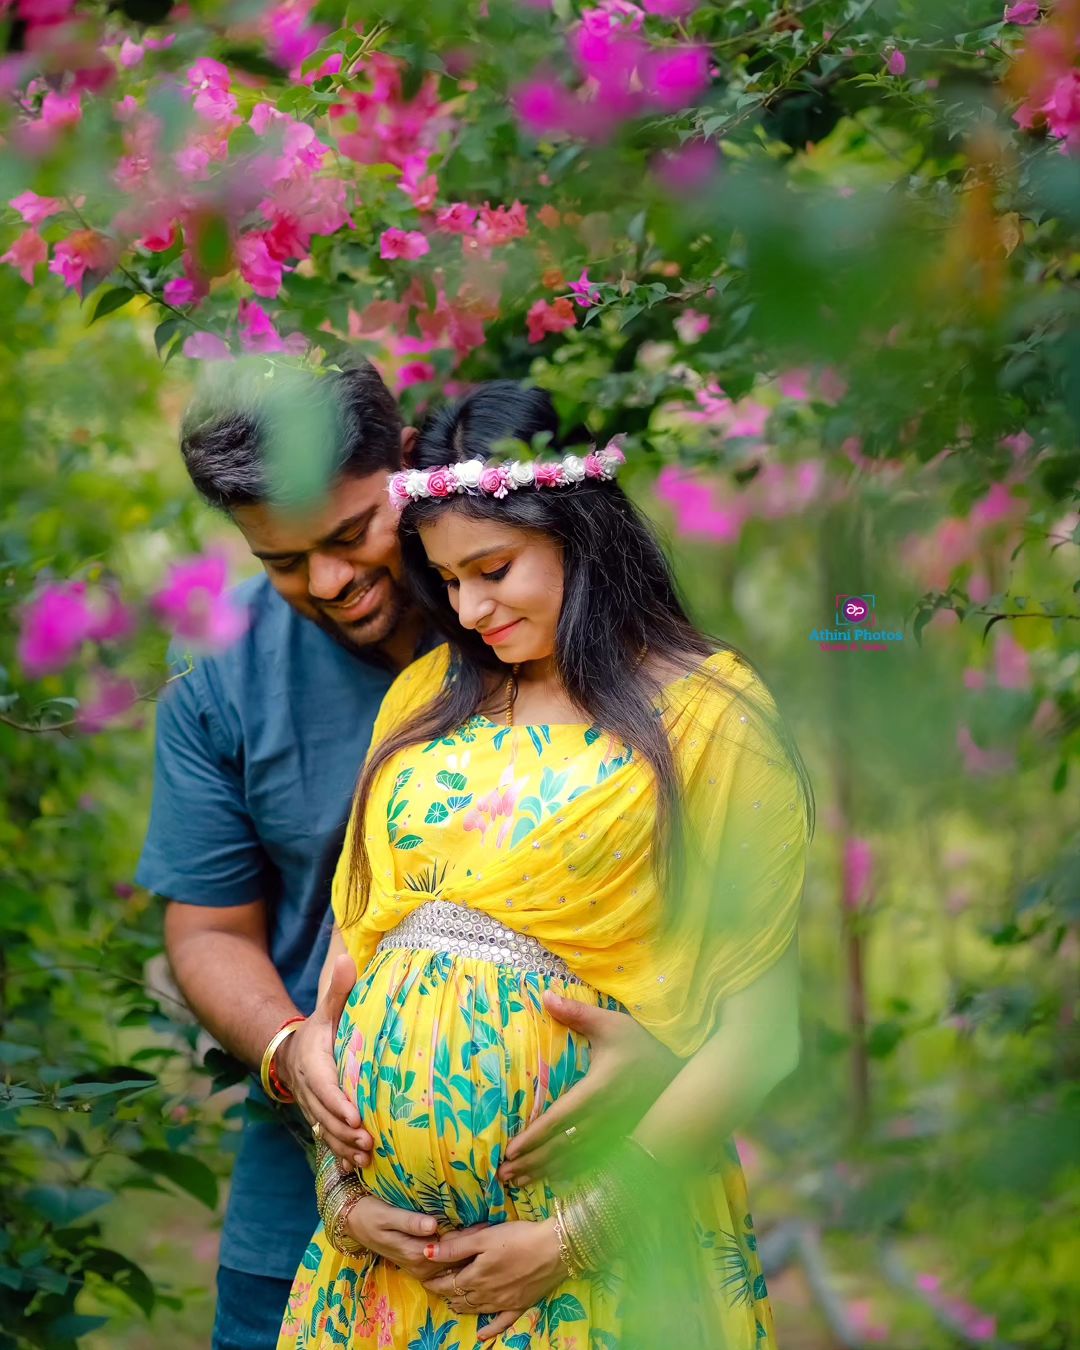 Best Pregnancy Photoshoot Poses for Stunning Maternity Pictures